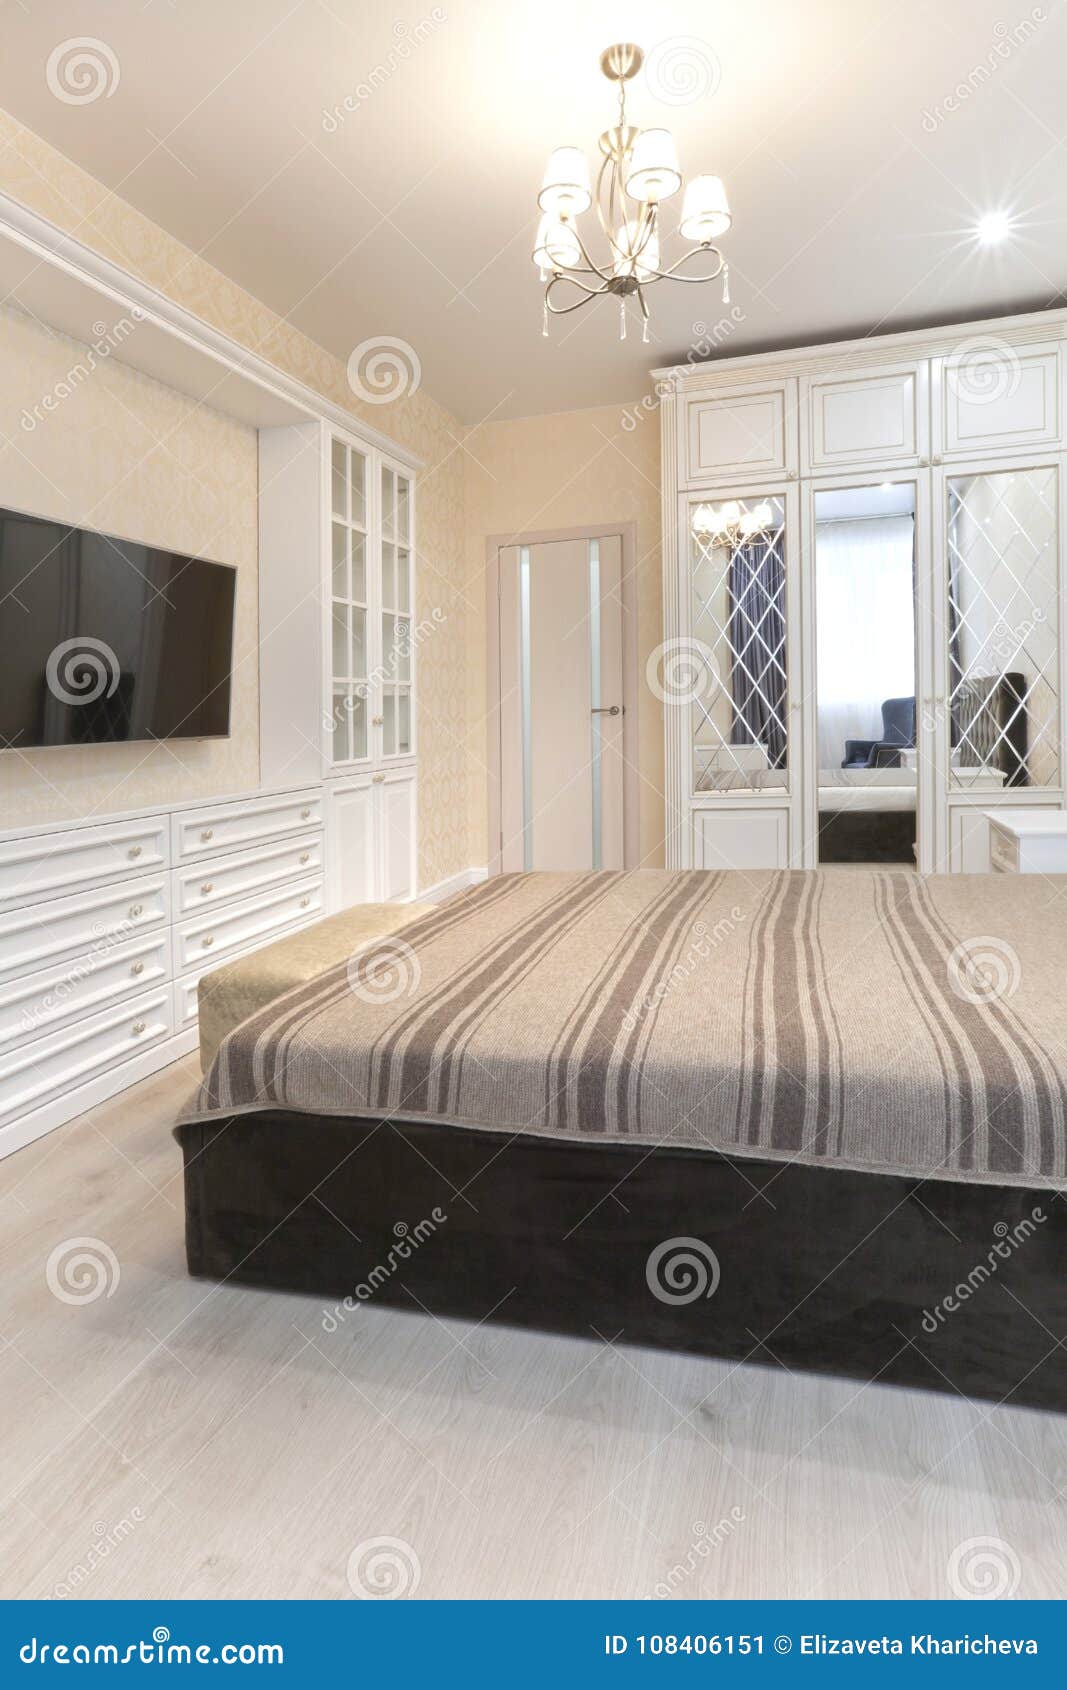 Bedroom In Light Colors With Wooden Furniture Stock Image